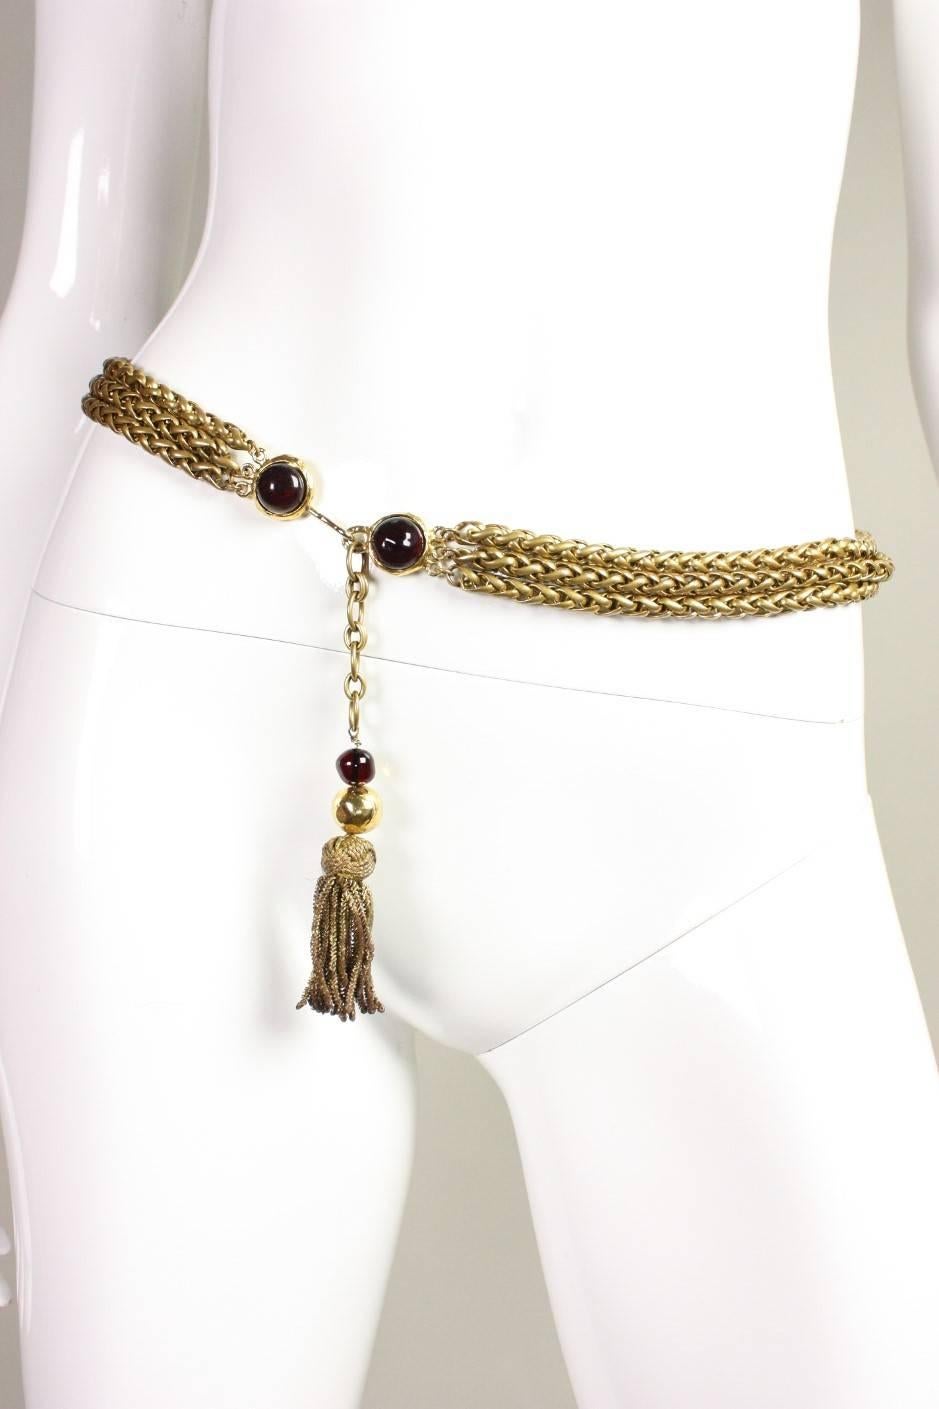 Vintage belt from Chanel likely dates to the 1980's and is made of gold-toned metal with an antiqued finish.  Three strands of dense chain.  Deep red gripoix details.  Chain is finished with a gold bullion tassel.  

Waist length- 29 1/2